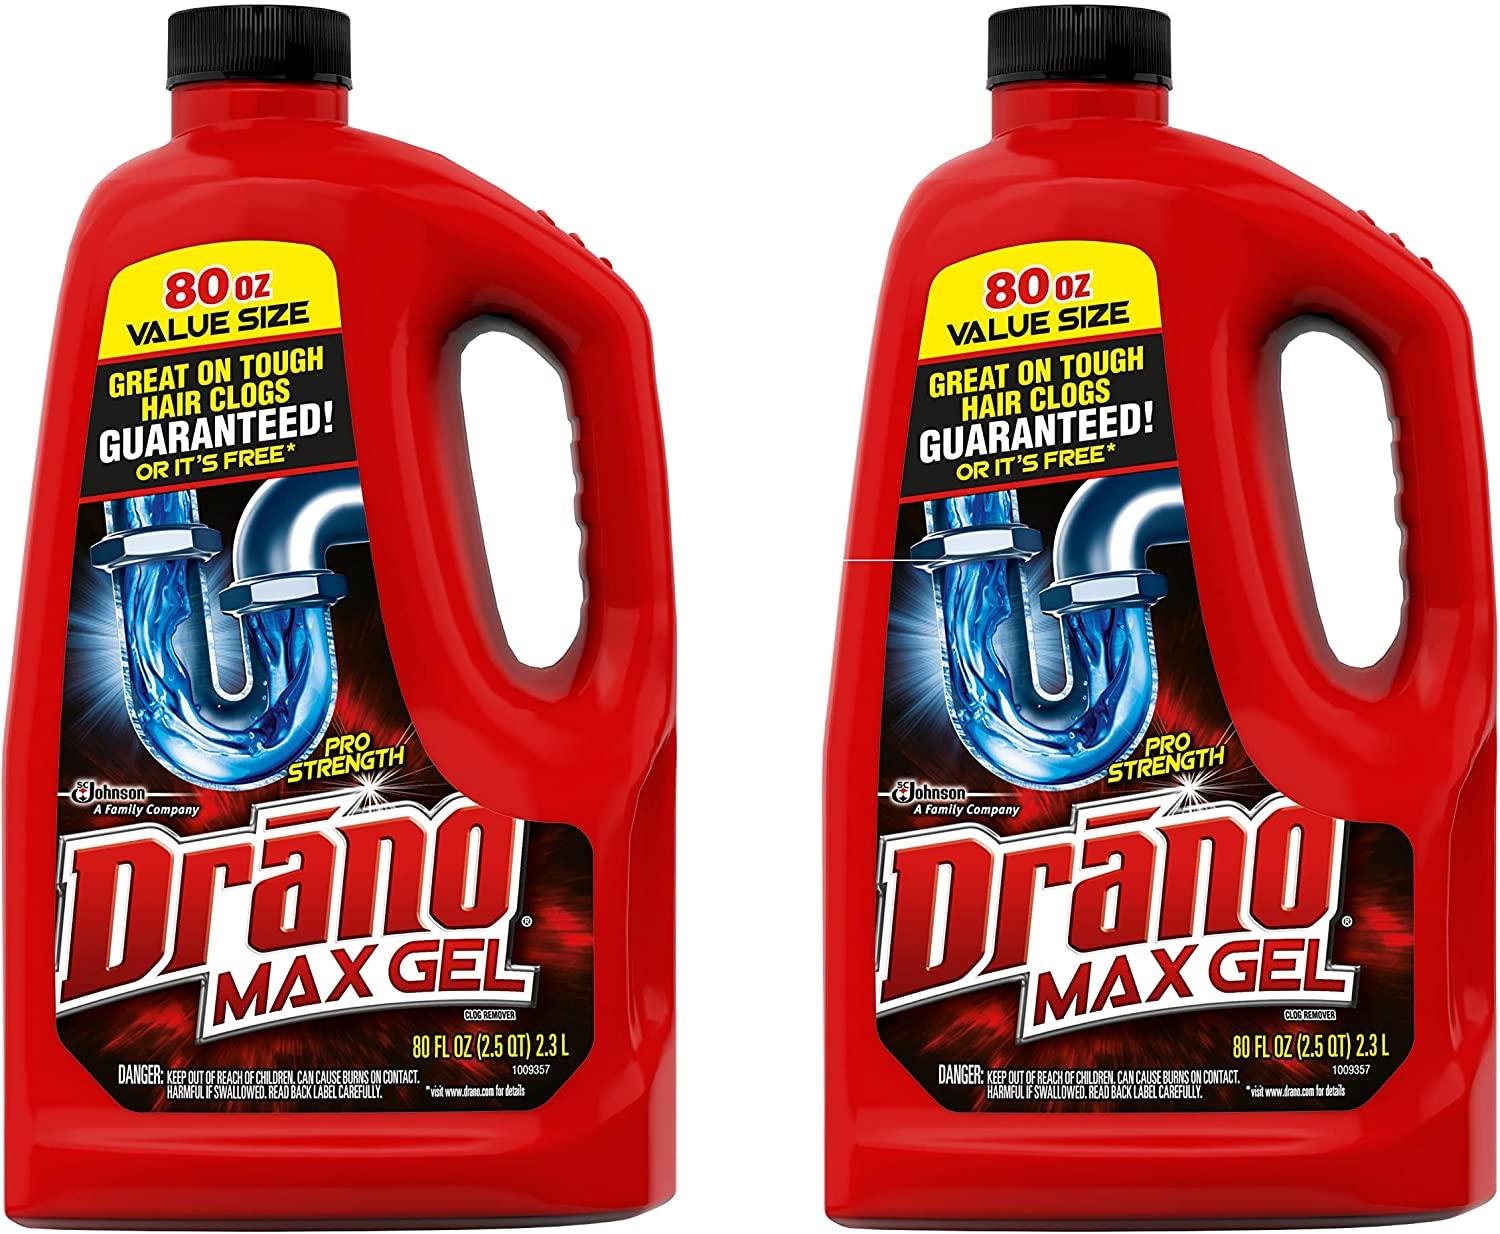 2-Count 80oz Drano Max Gel Clog Remover for $9.48 Shipped